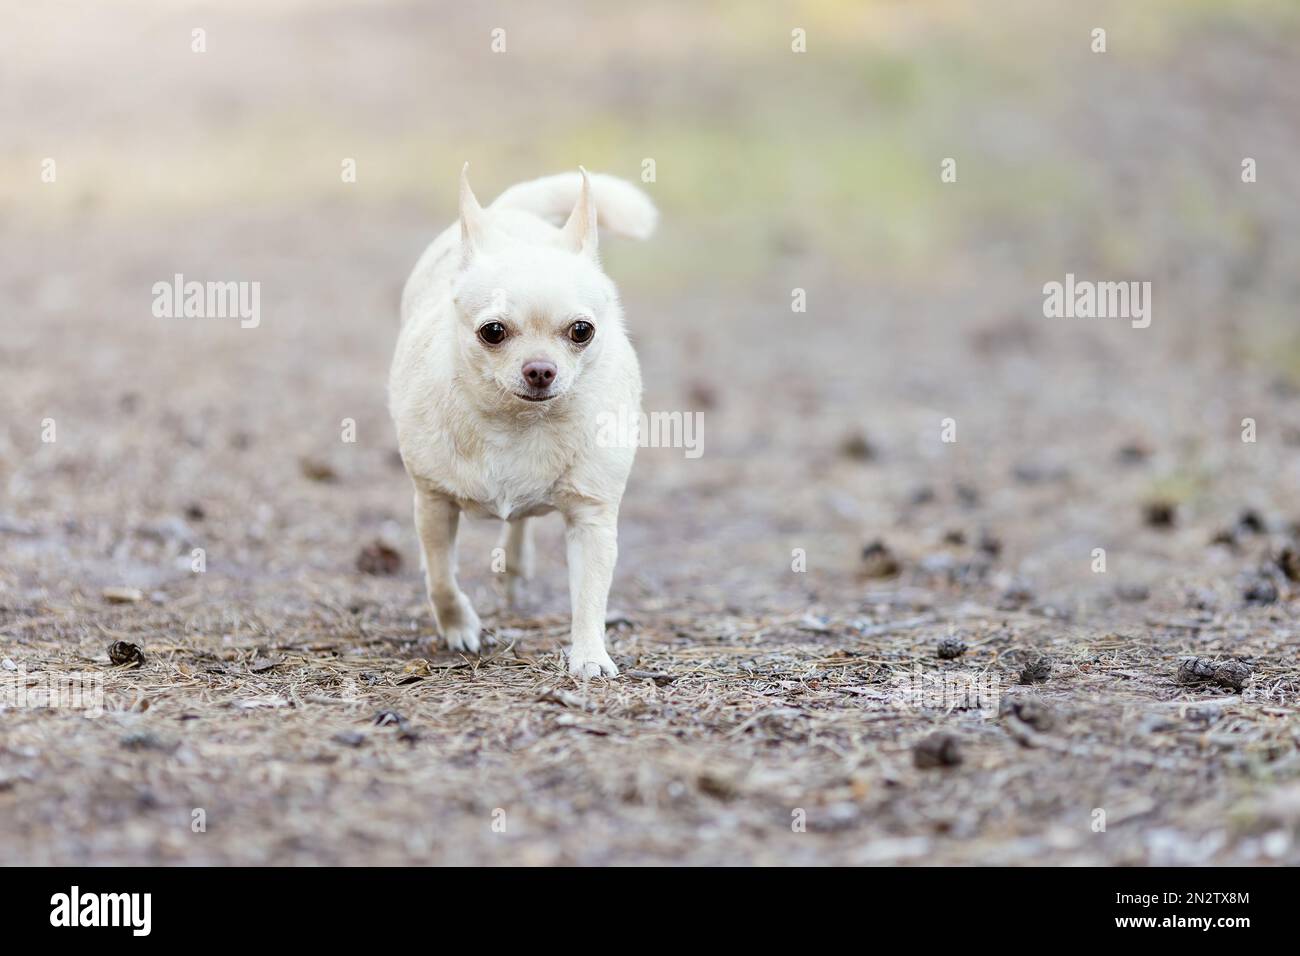 Old chihuahua dog of white color lost at nature and seek for owner Stock Photo